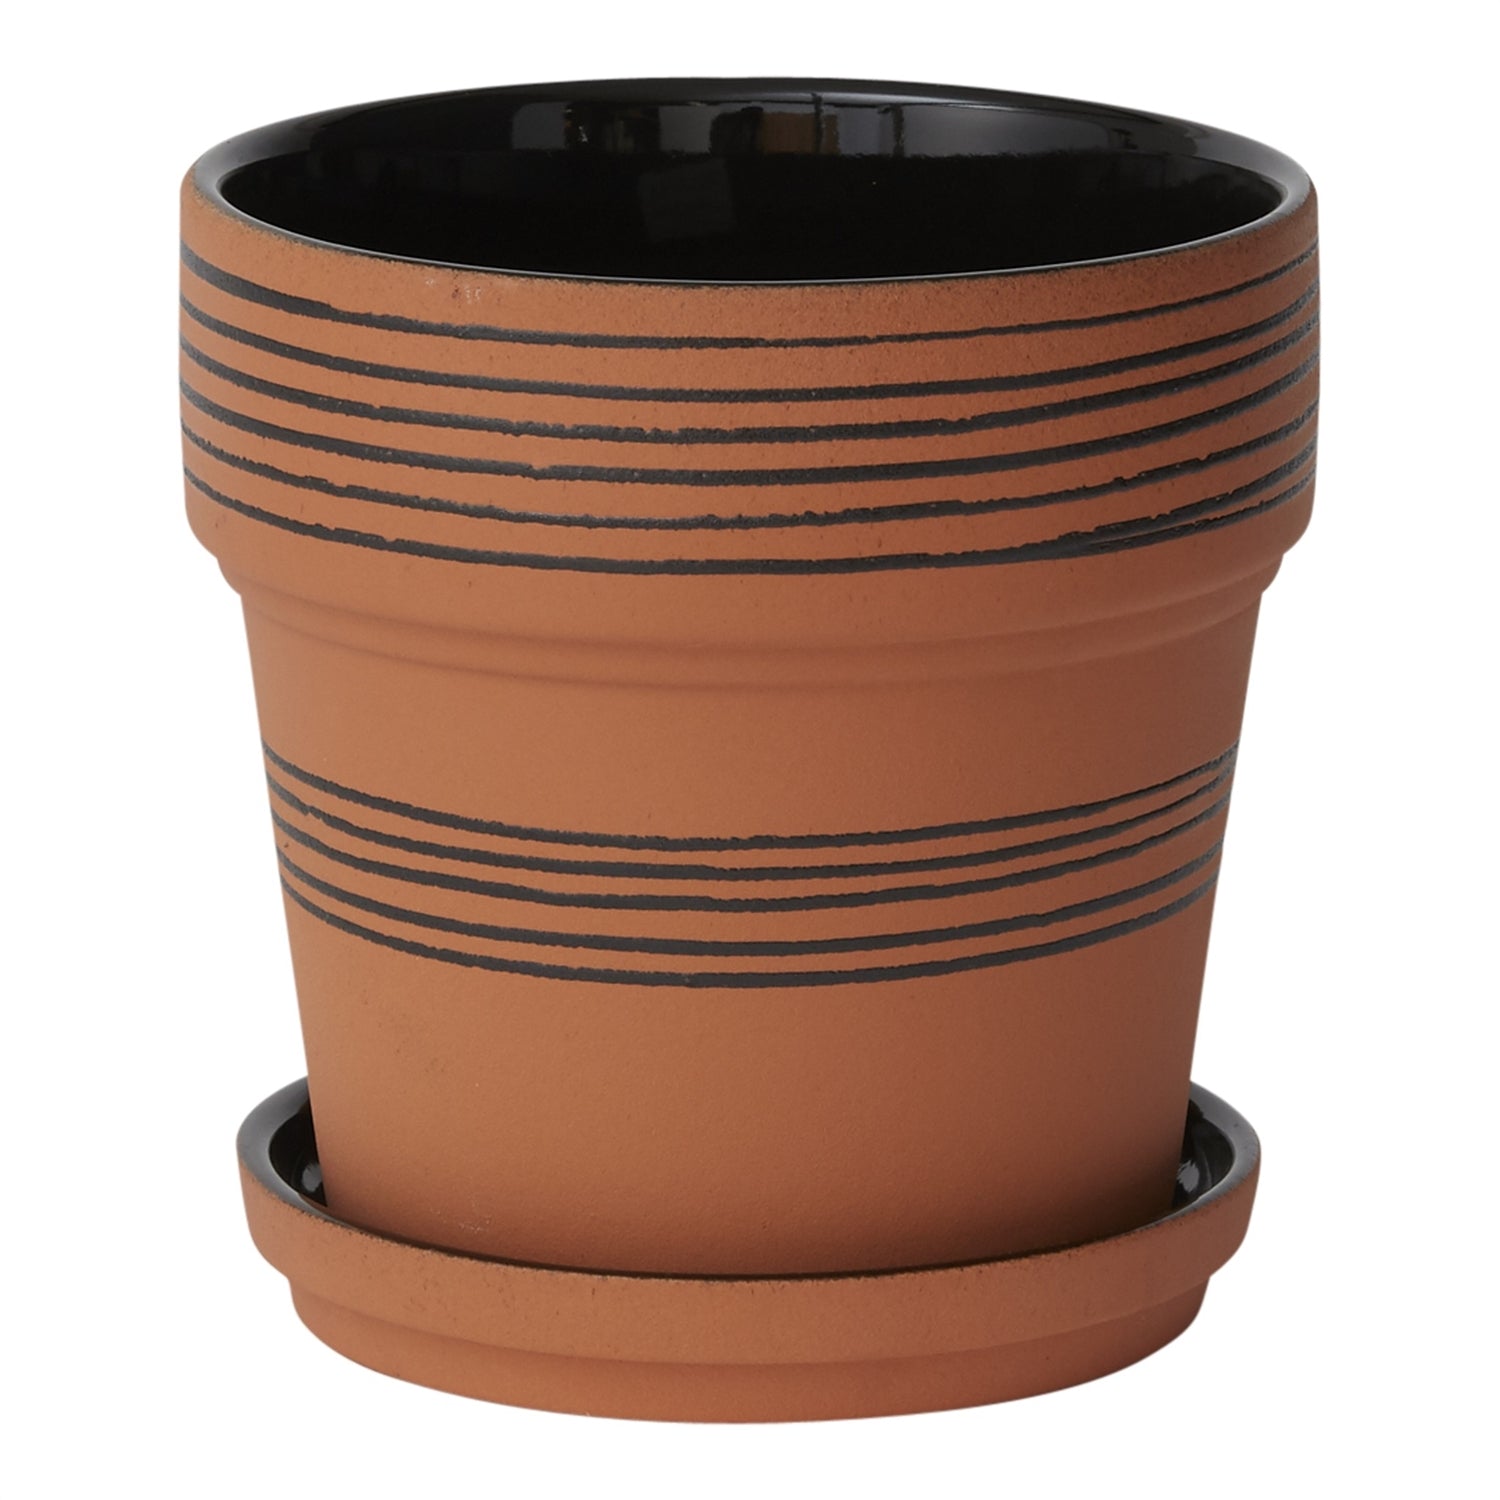 Our Herati Pot is the perfect addition to any garden or window ledge. Ceremic Terra-cotta with black horizontal banding design. Comes with watering tray in same material. Small pot 4" x 4.5" (opening size 3.5") Large pot 6.5" x 6.5" (opening size 6")